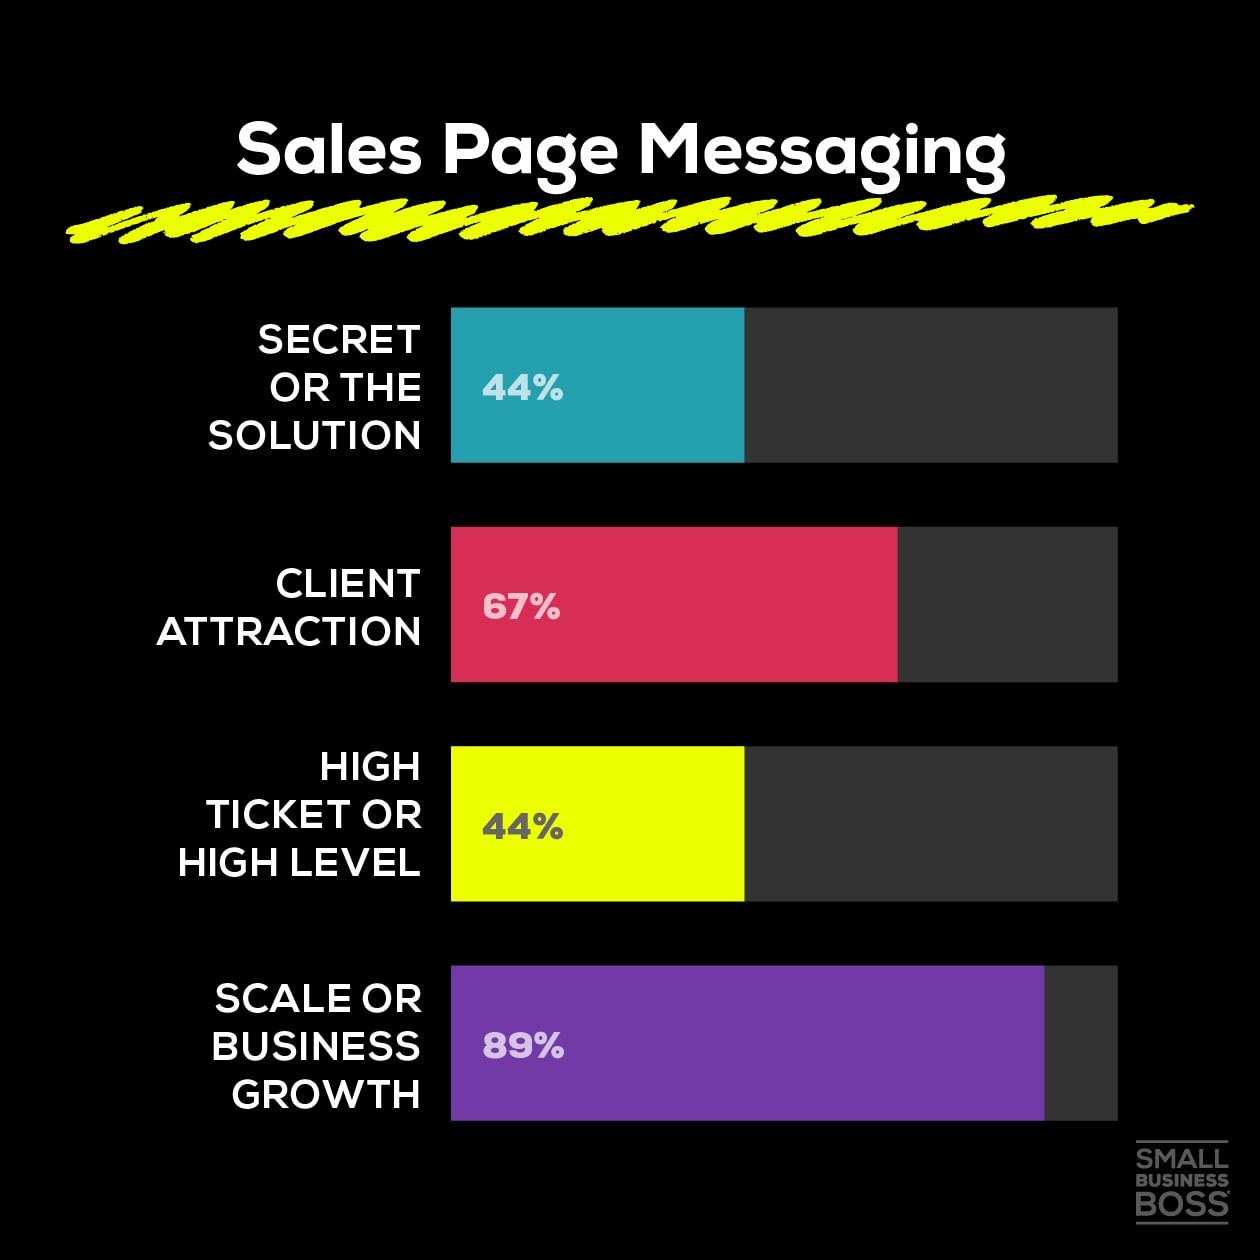 Sales Page Messaging